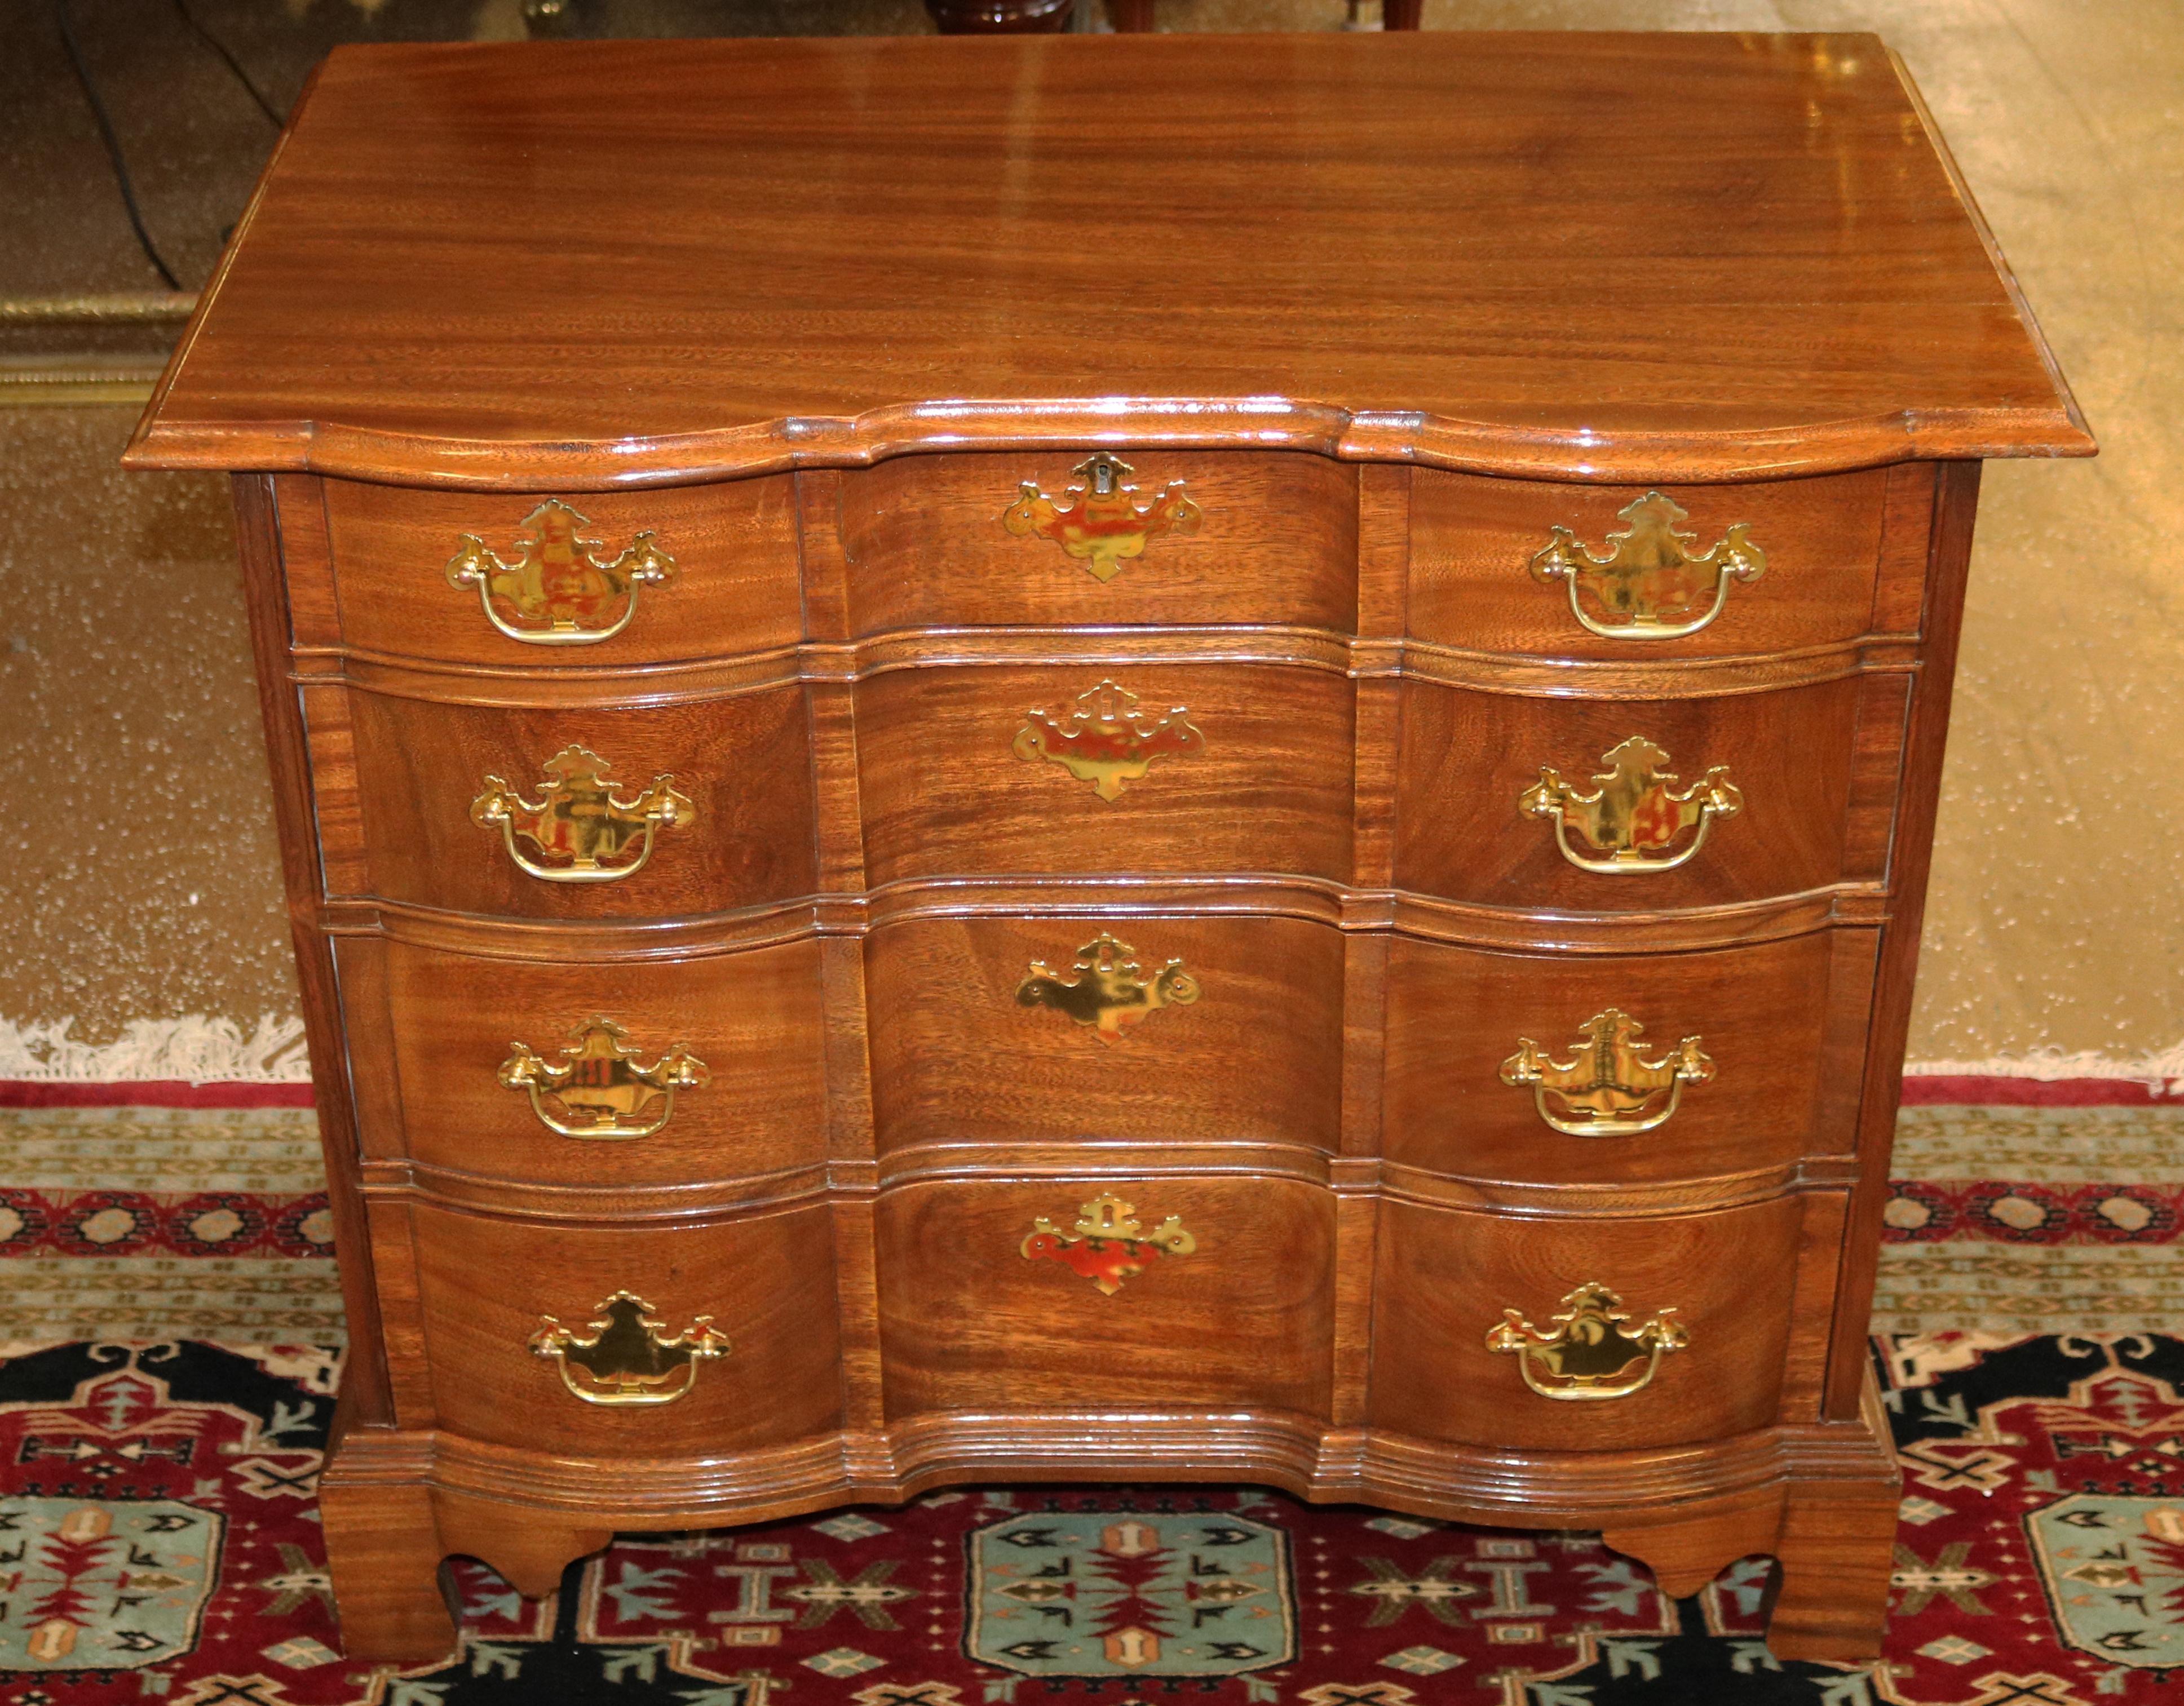 Hickory Manufacturing Mahogany Chippendale Style Block Front Dresser Chest of Drawers

Dimensions : 37.25